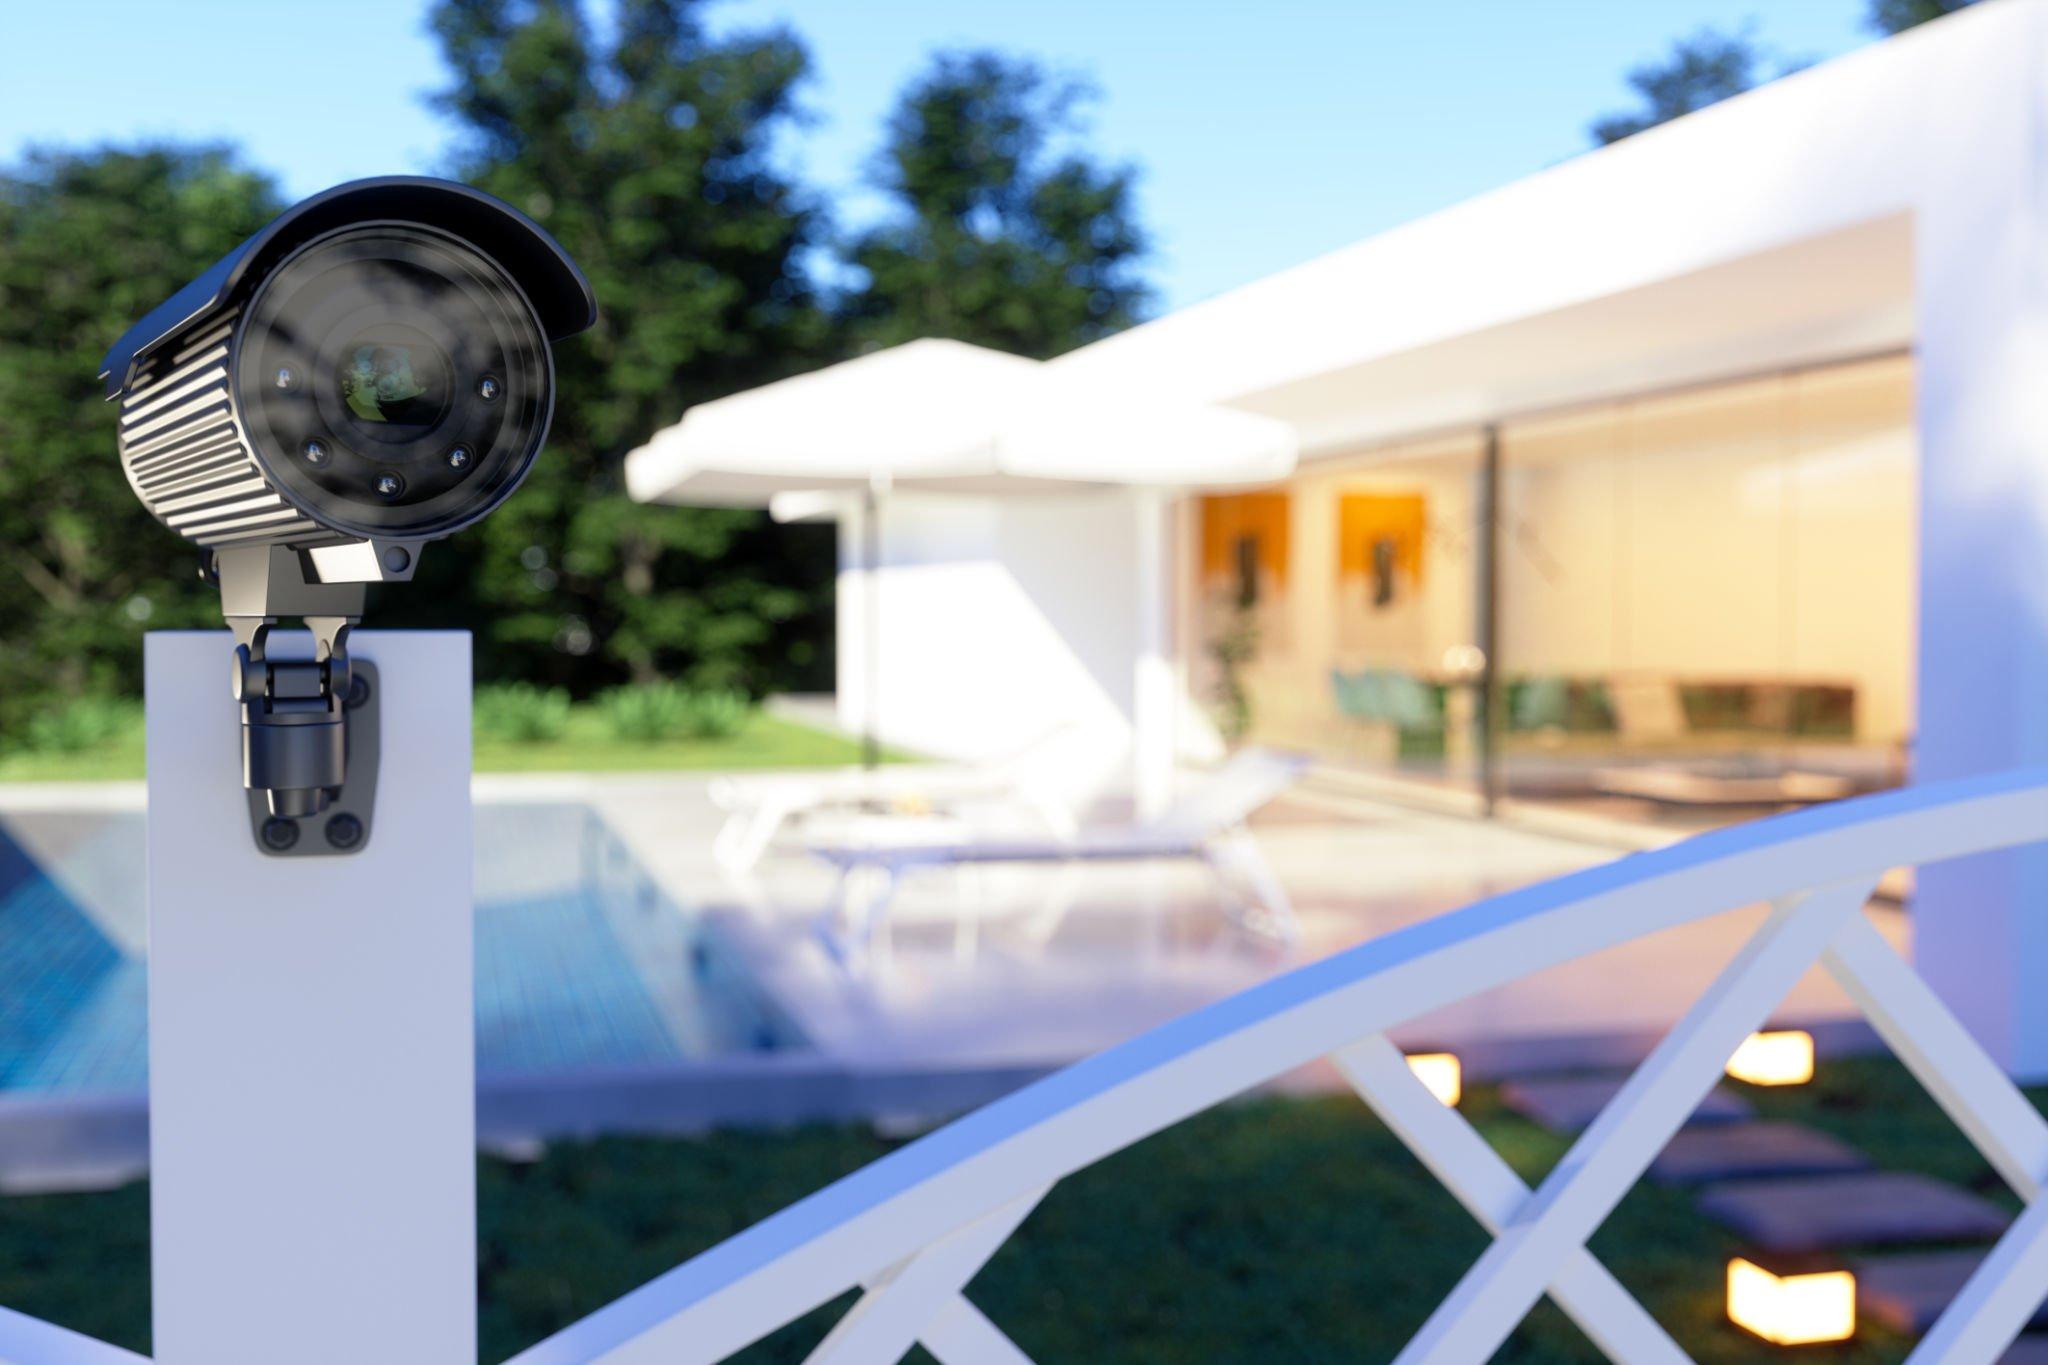 How to Choose the Right Home Video Surveillance System for Your Needs